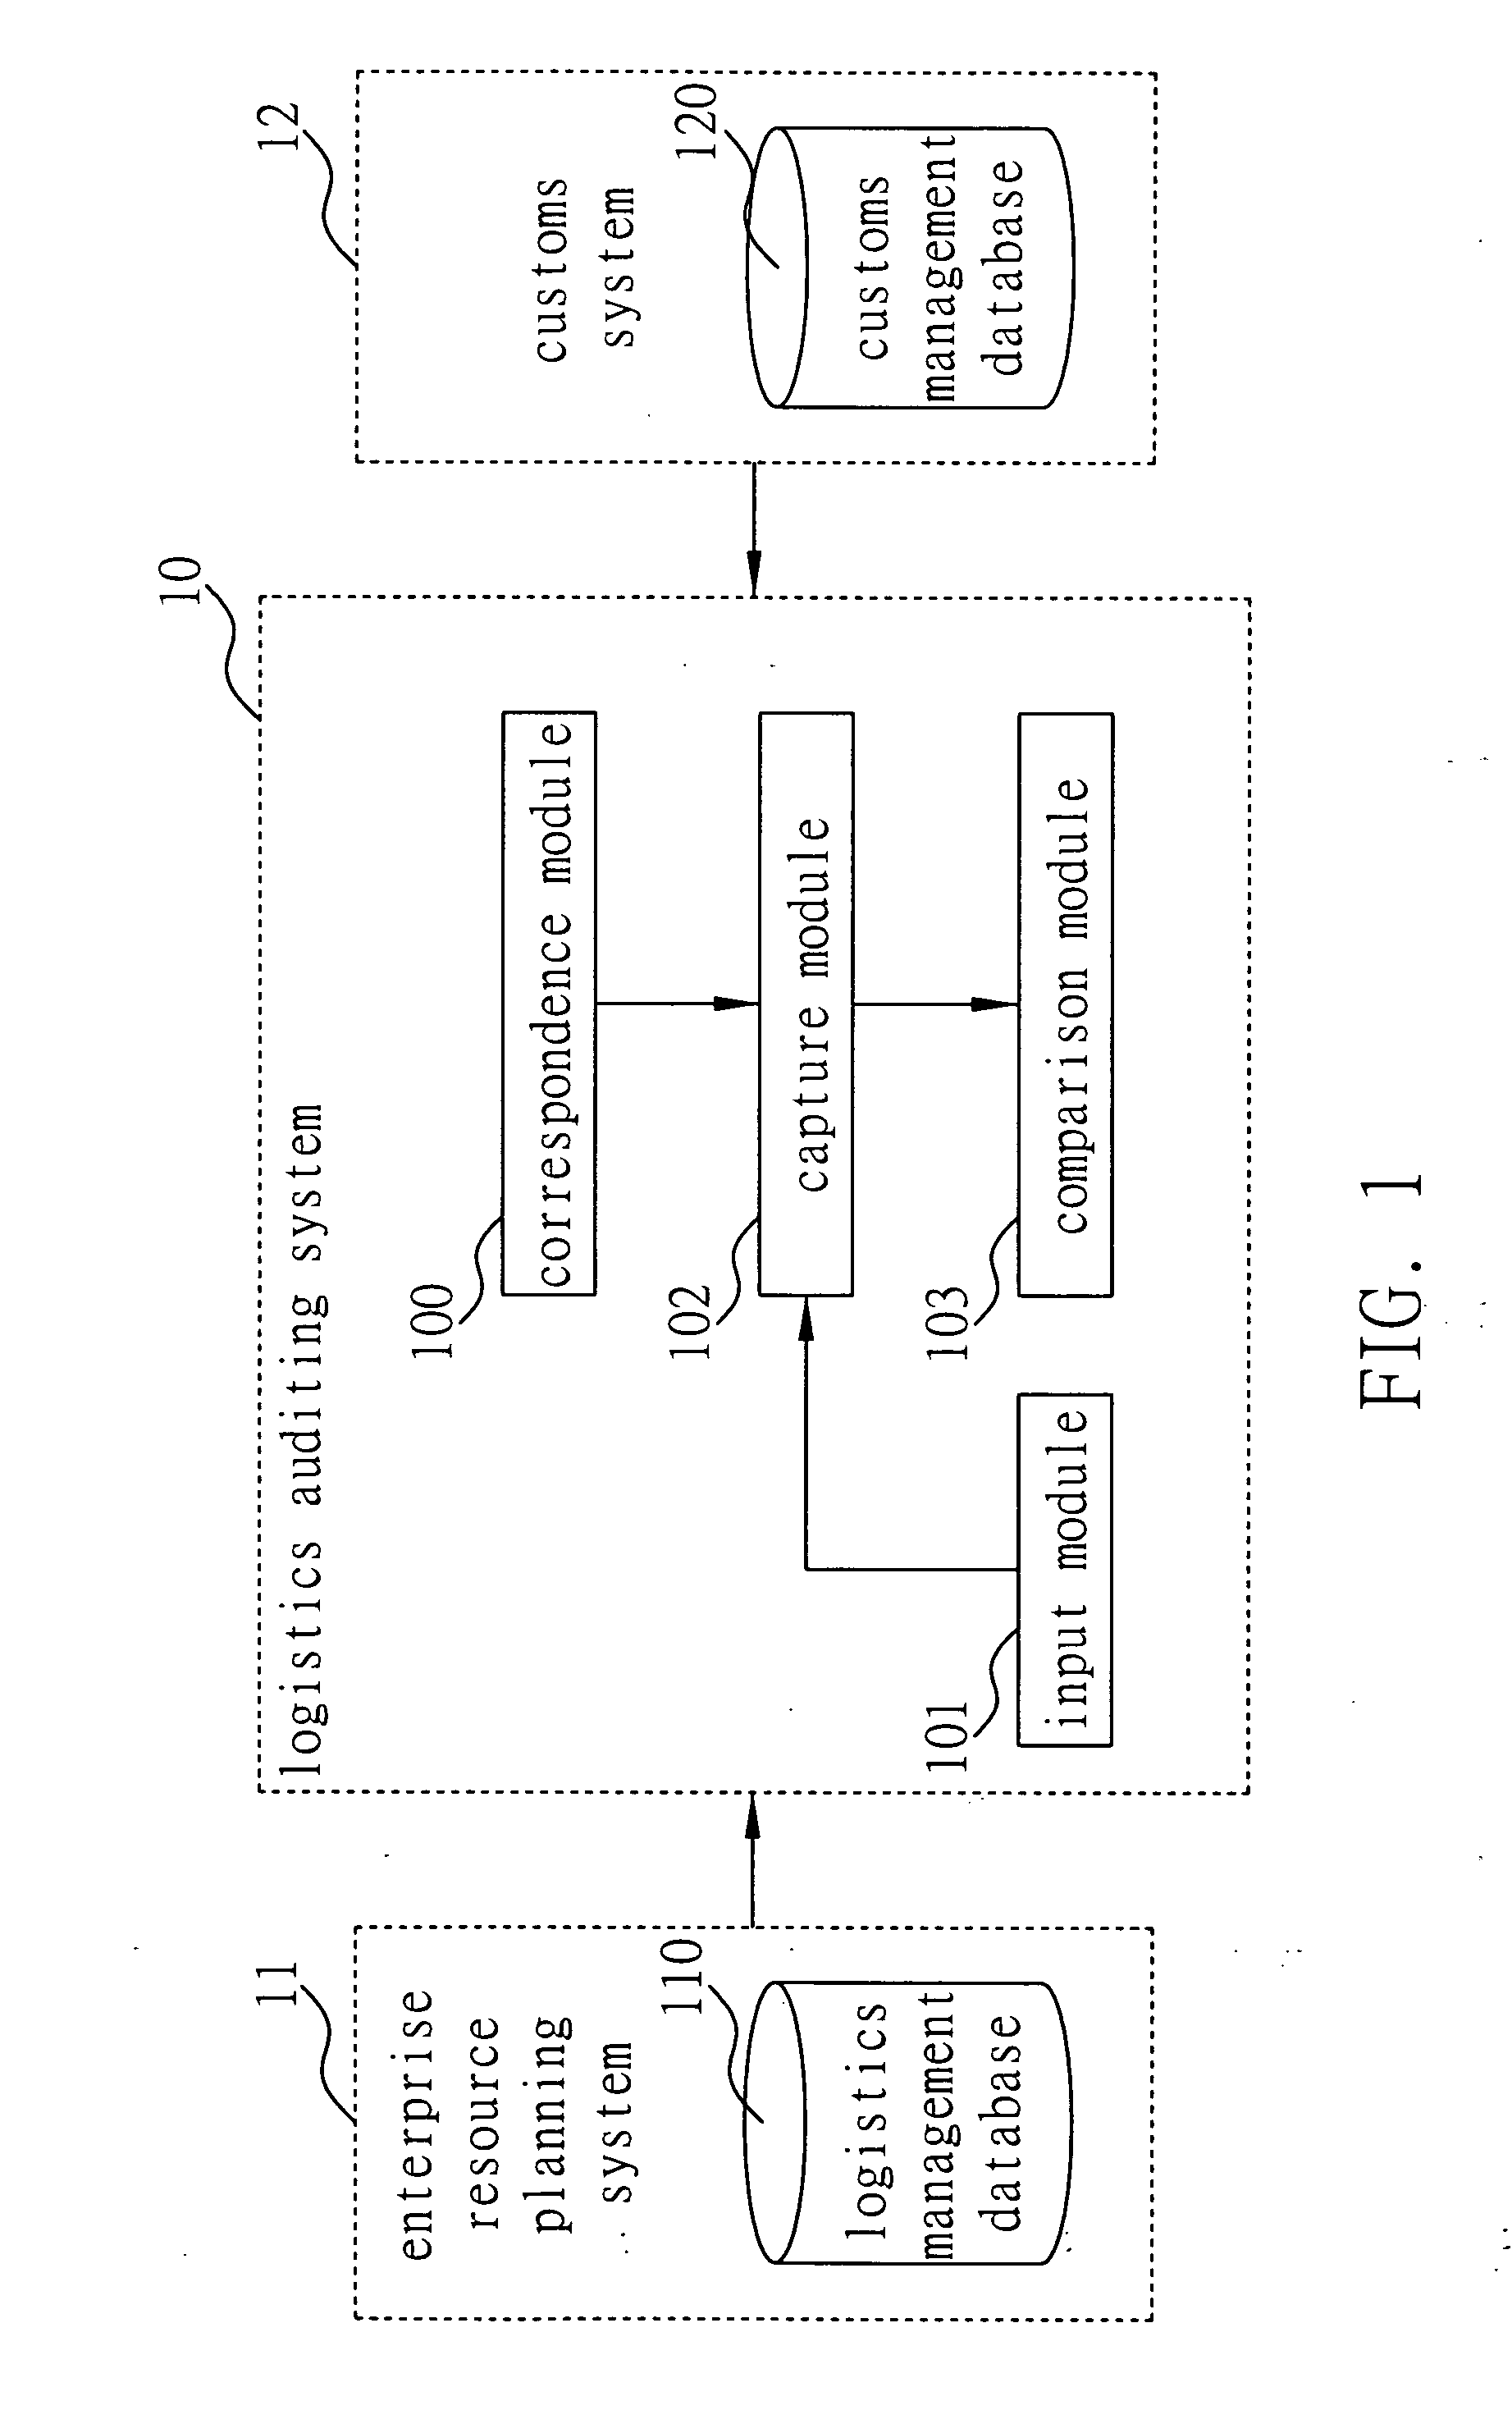 Logistics auditing system and method